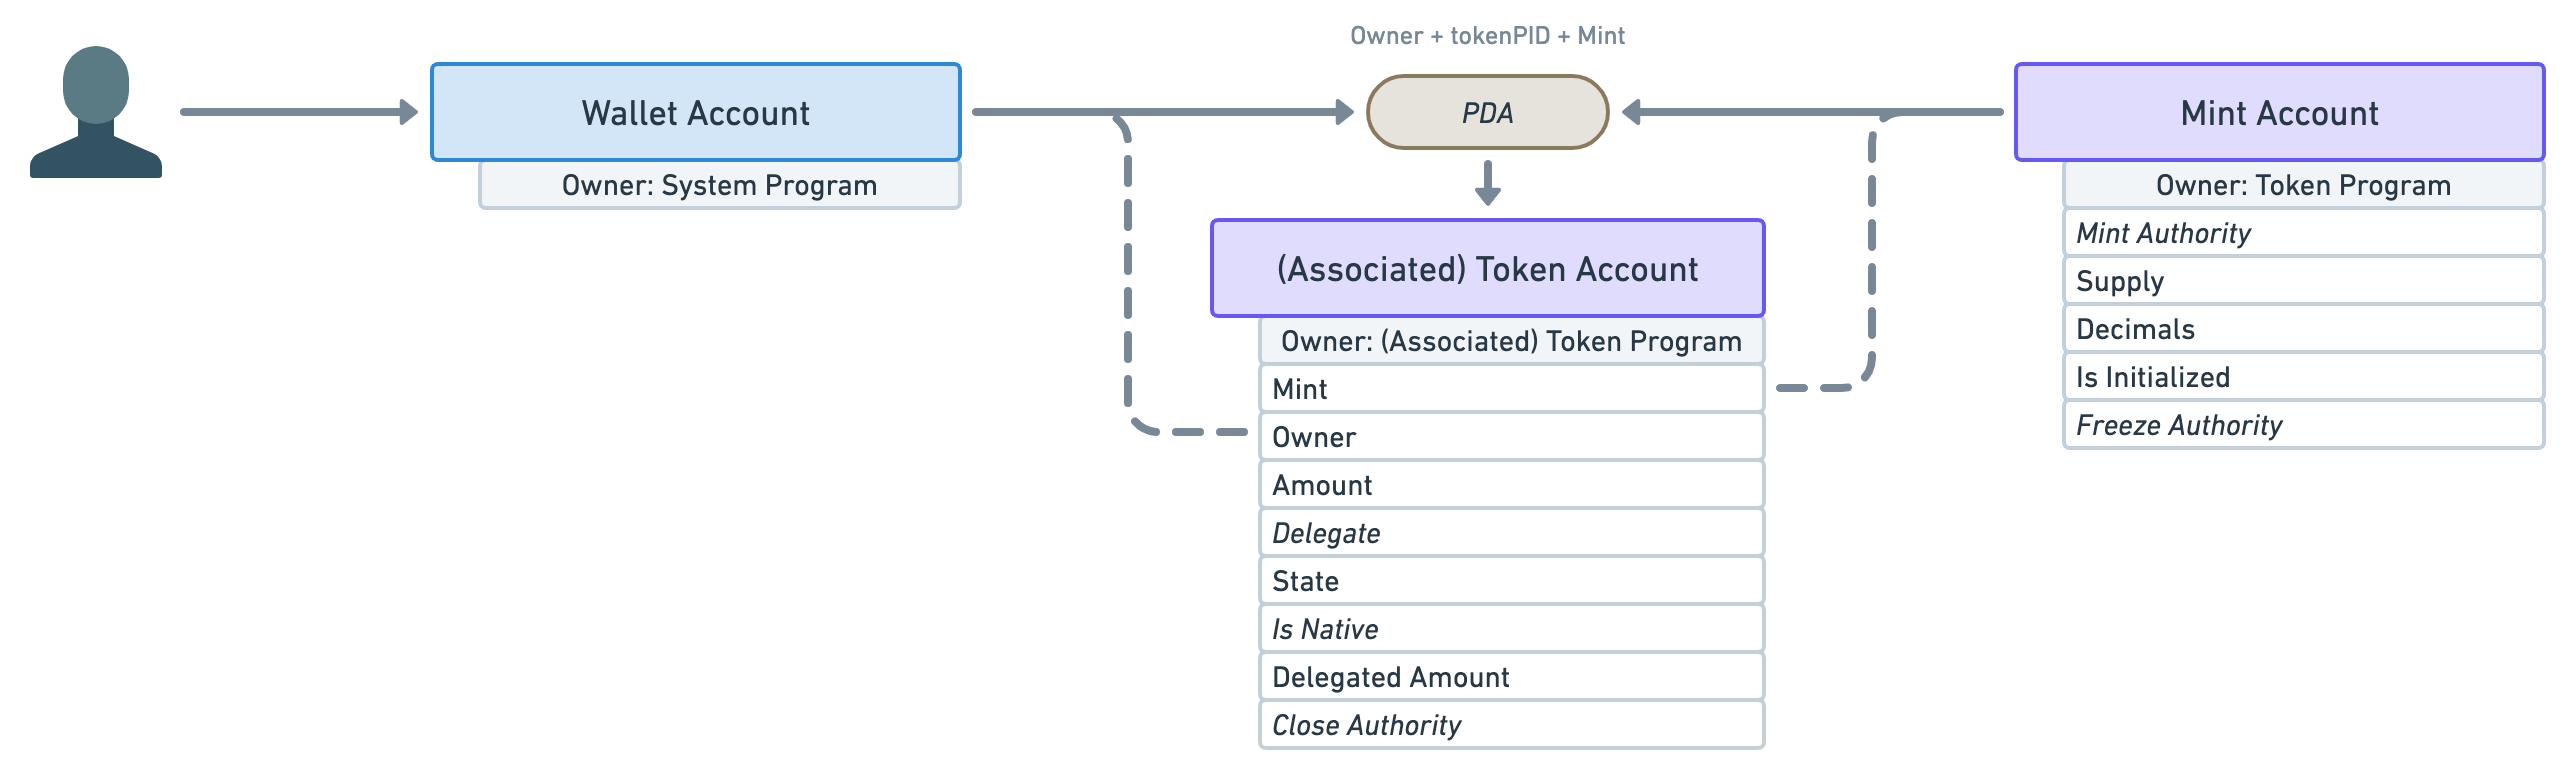 Diagram showing a user icon pointing to a wallet account which connects to a mint account through an “(Associated) Token Account”. There is now additional data available below each of these accounts. Below the wallet account reads: “Owner: System Program”. Below the token account reads “Owner: (Associated) Token Program” followed by the data attributes (one per line): Mint; Owner; Amount; Delegate (in italic); State; Is Native (in italic); Delegated Amount; Close Authority (in italic). Below the mint, the account reads “Owner: Token Program” followed by the data attributes (one per line): Mint Authority (in italic); Supply; Decimals; Is Initialized; Freeze Authority (in italic).